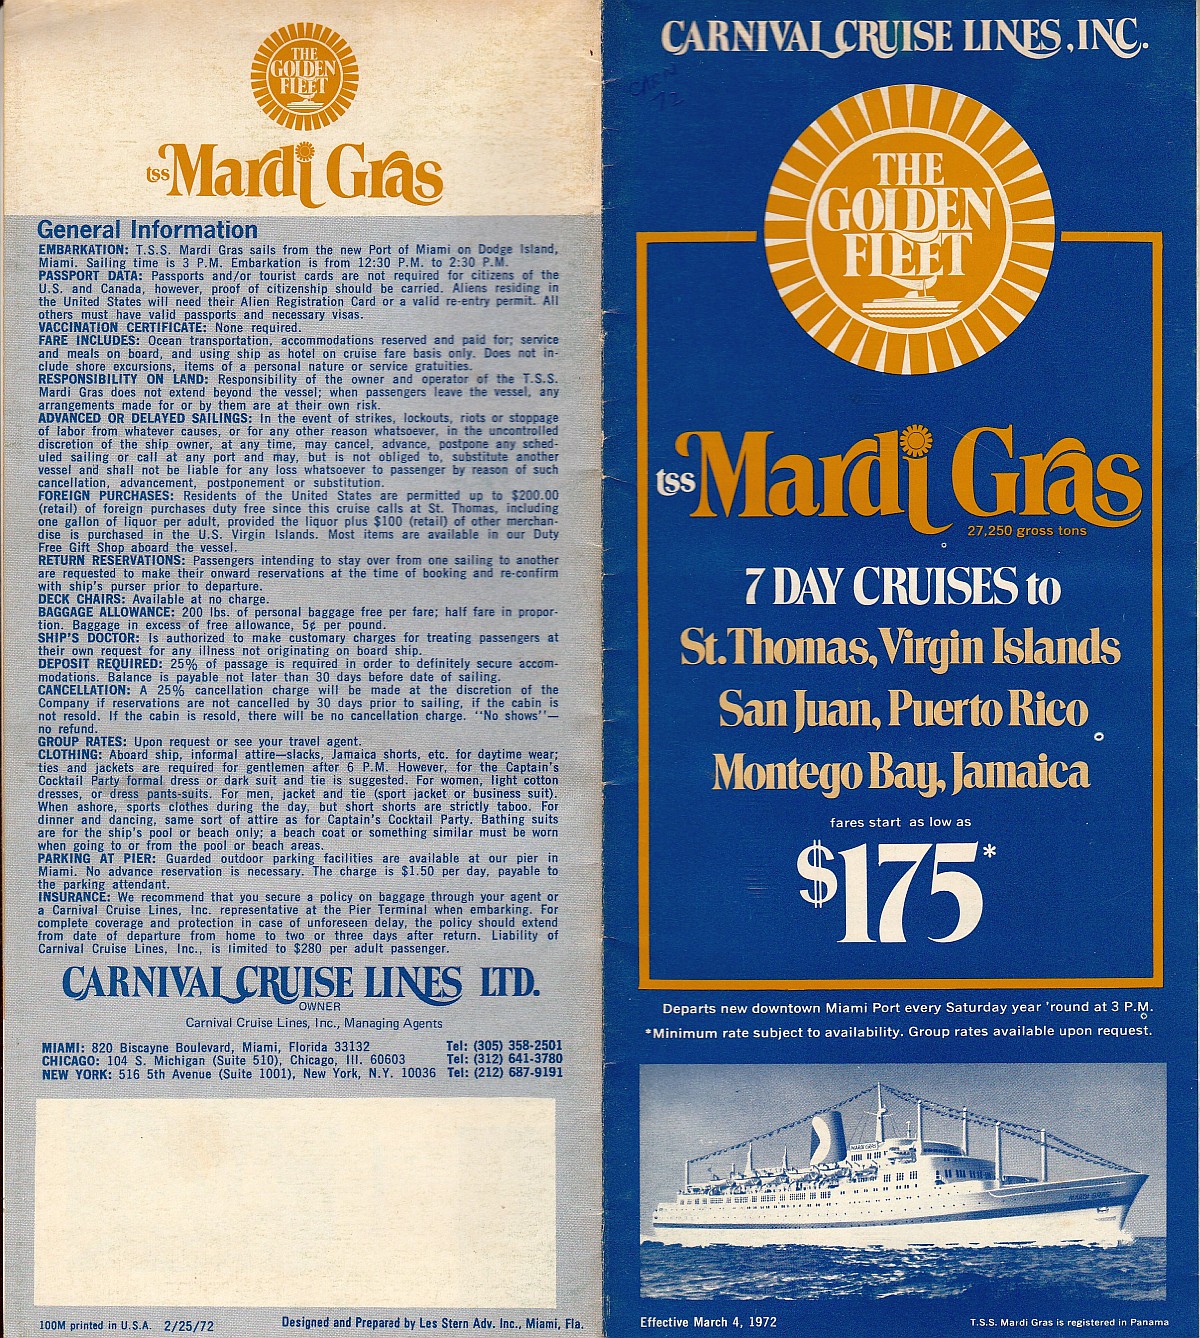 tss Mardi Gras effective Mar. 4, 1972: Front cover and general information